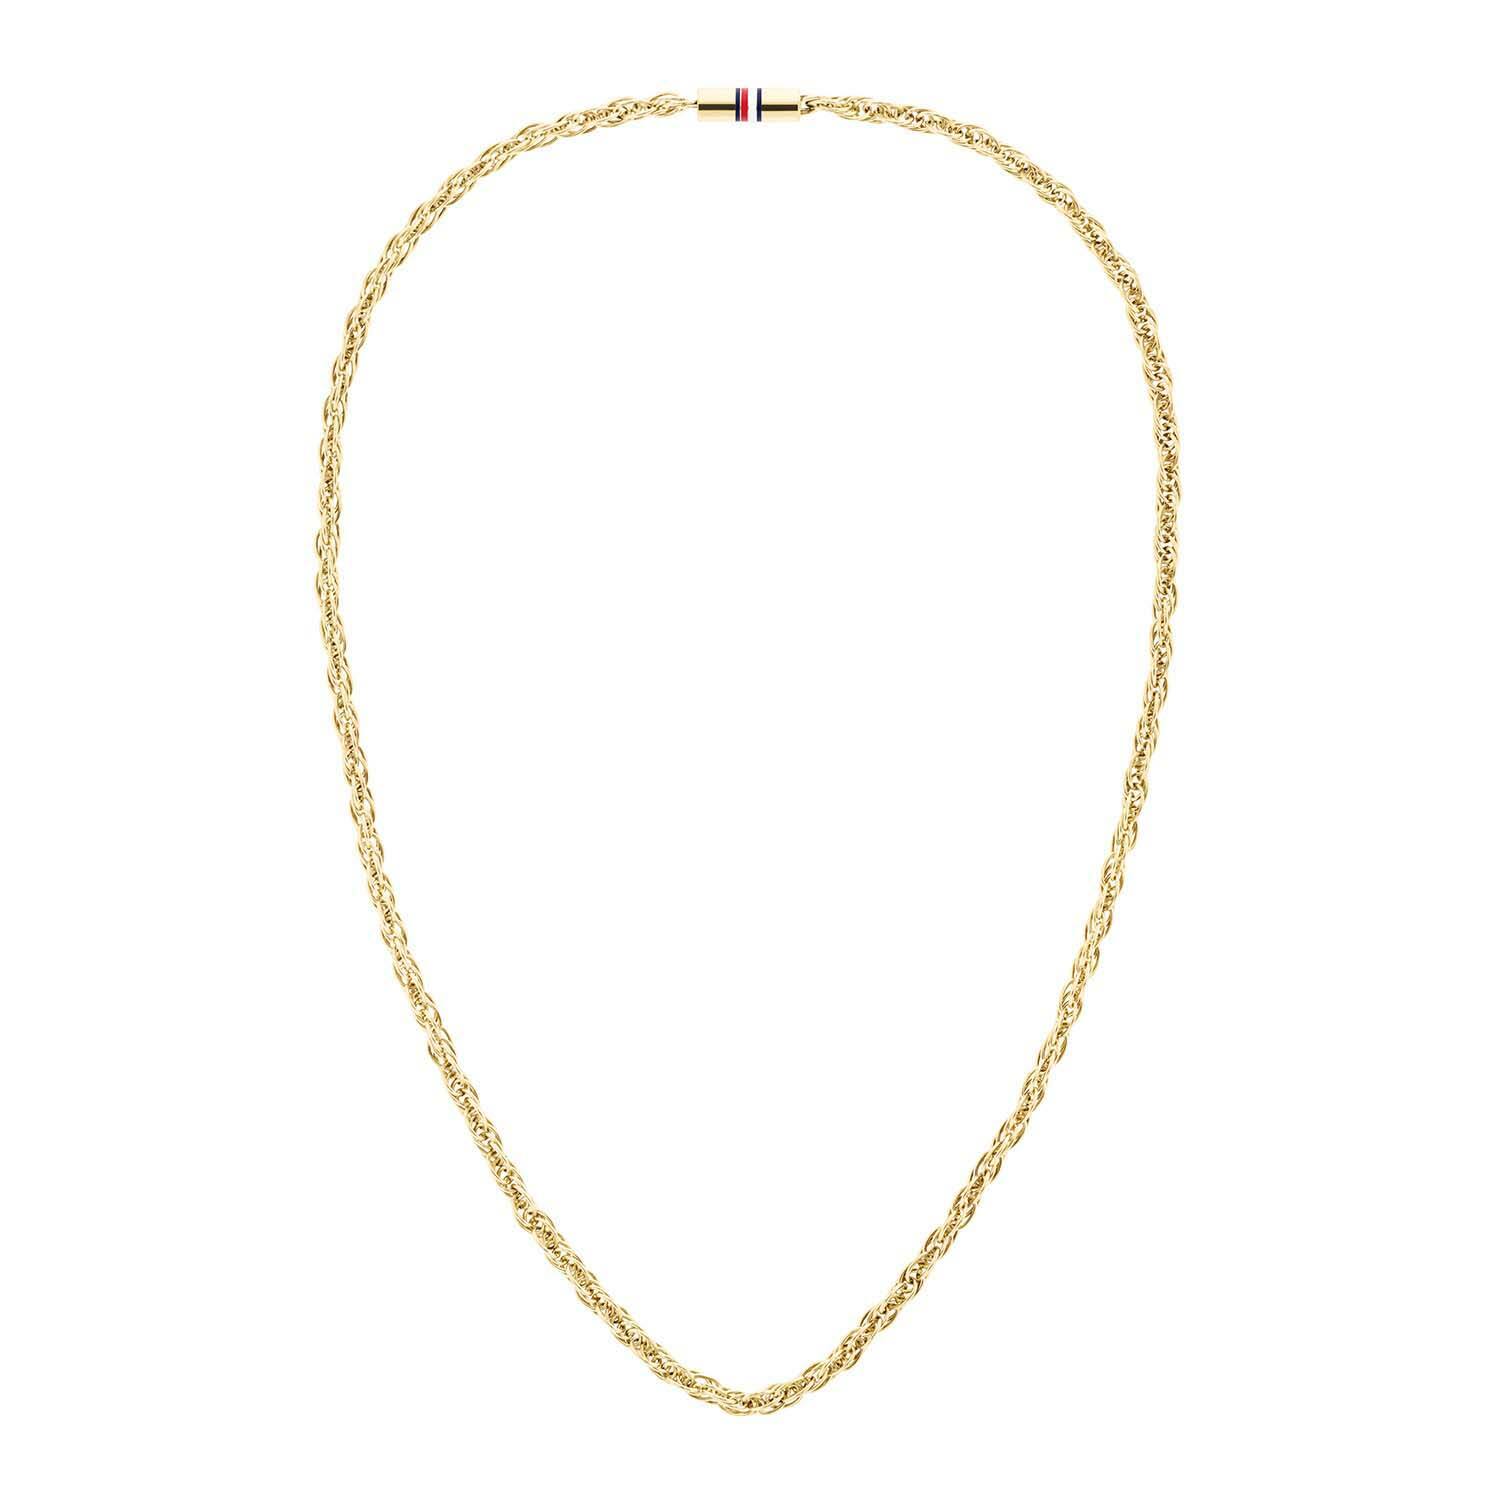  Collier - Staal - 60cm